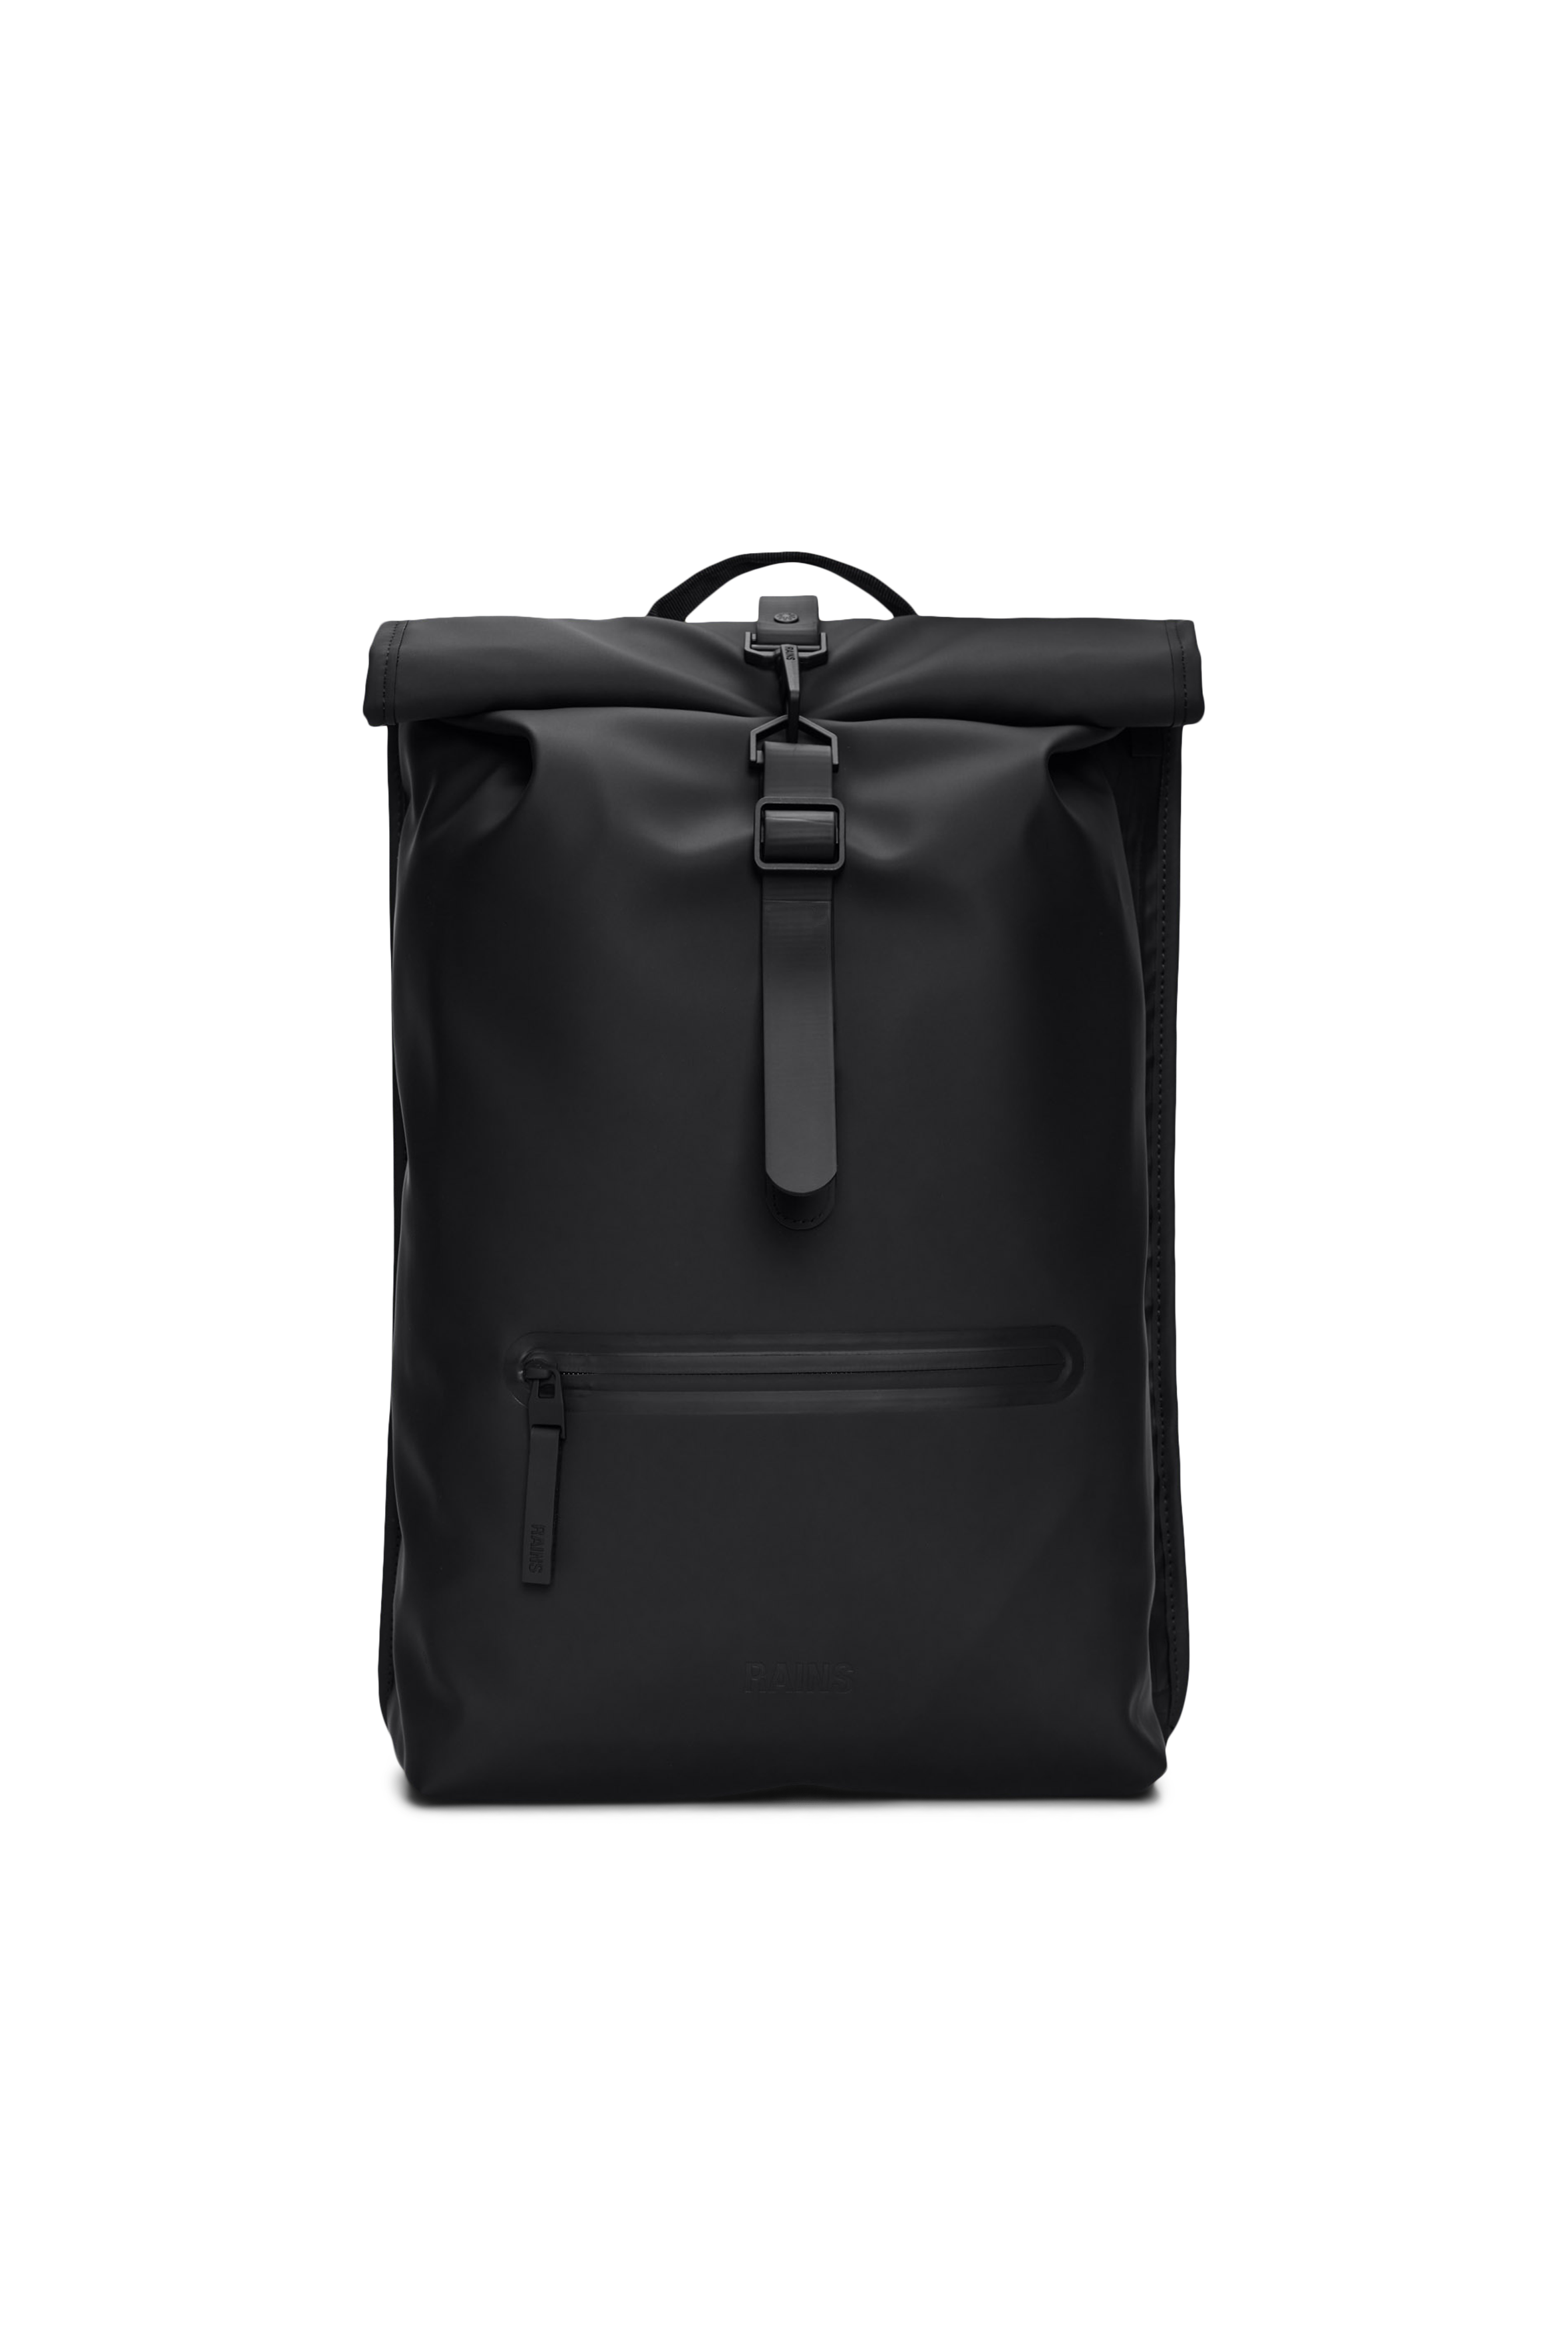 Rains® Rolltop Rucksack in Black for £105 | Free Shipping